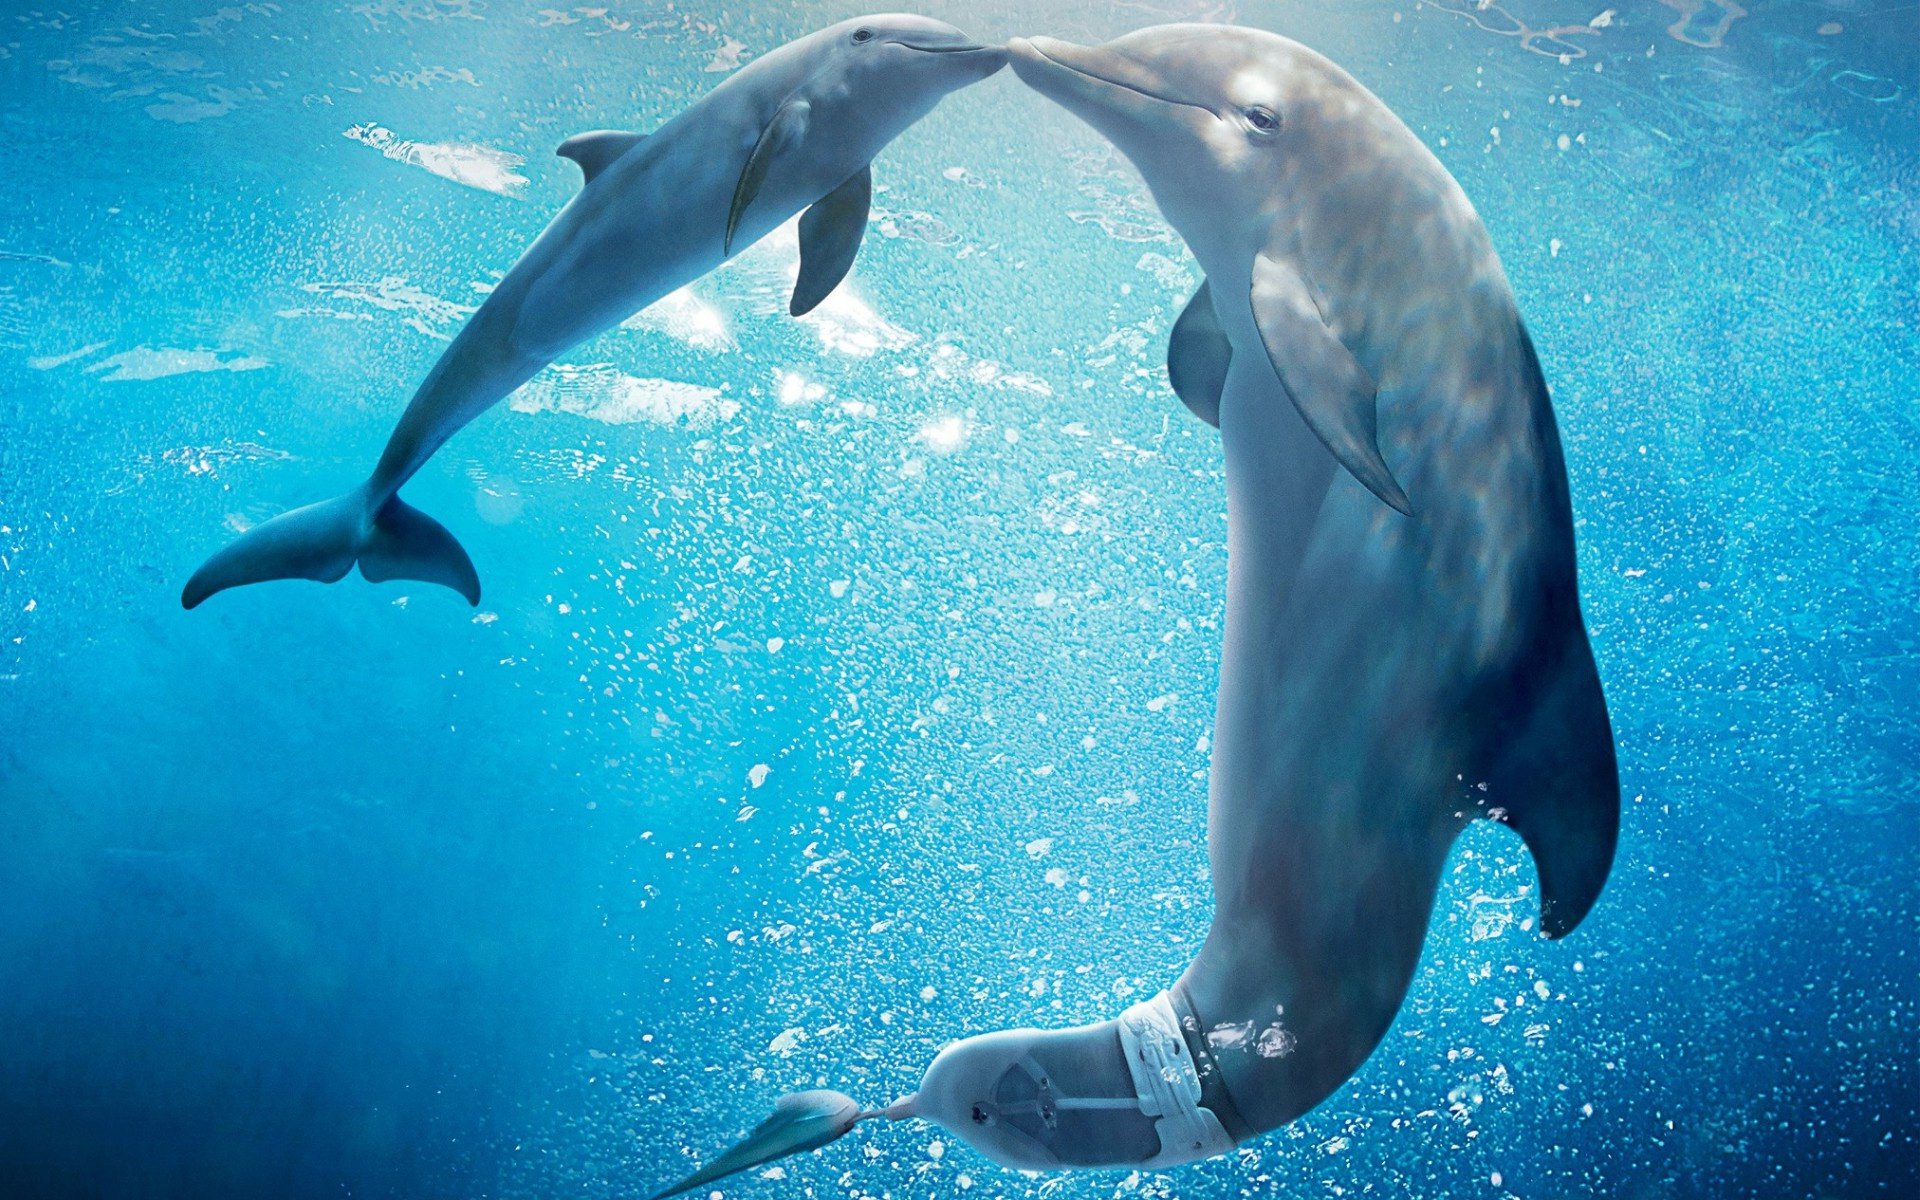 Dolphin Tale Pics, Movie Collection